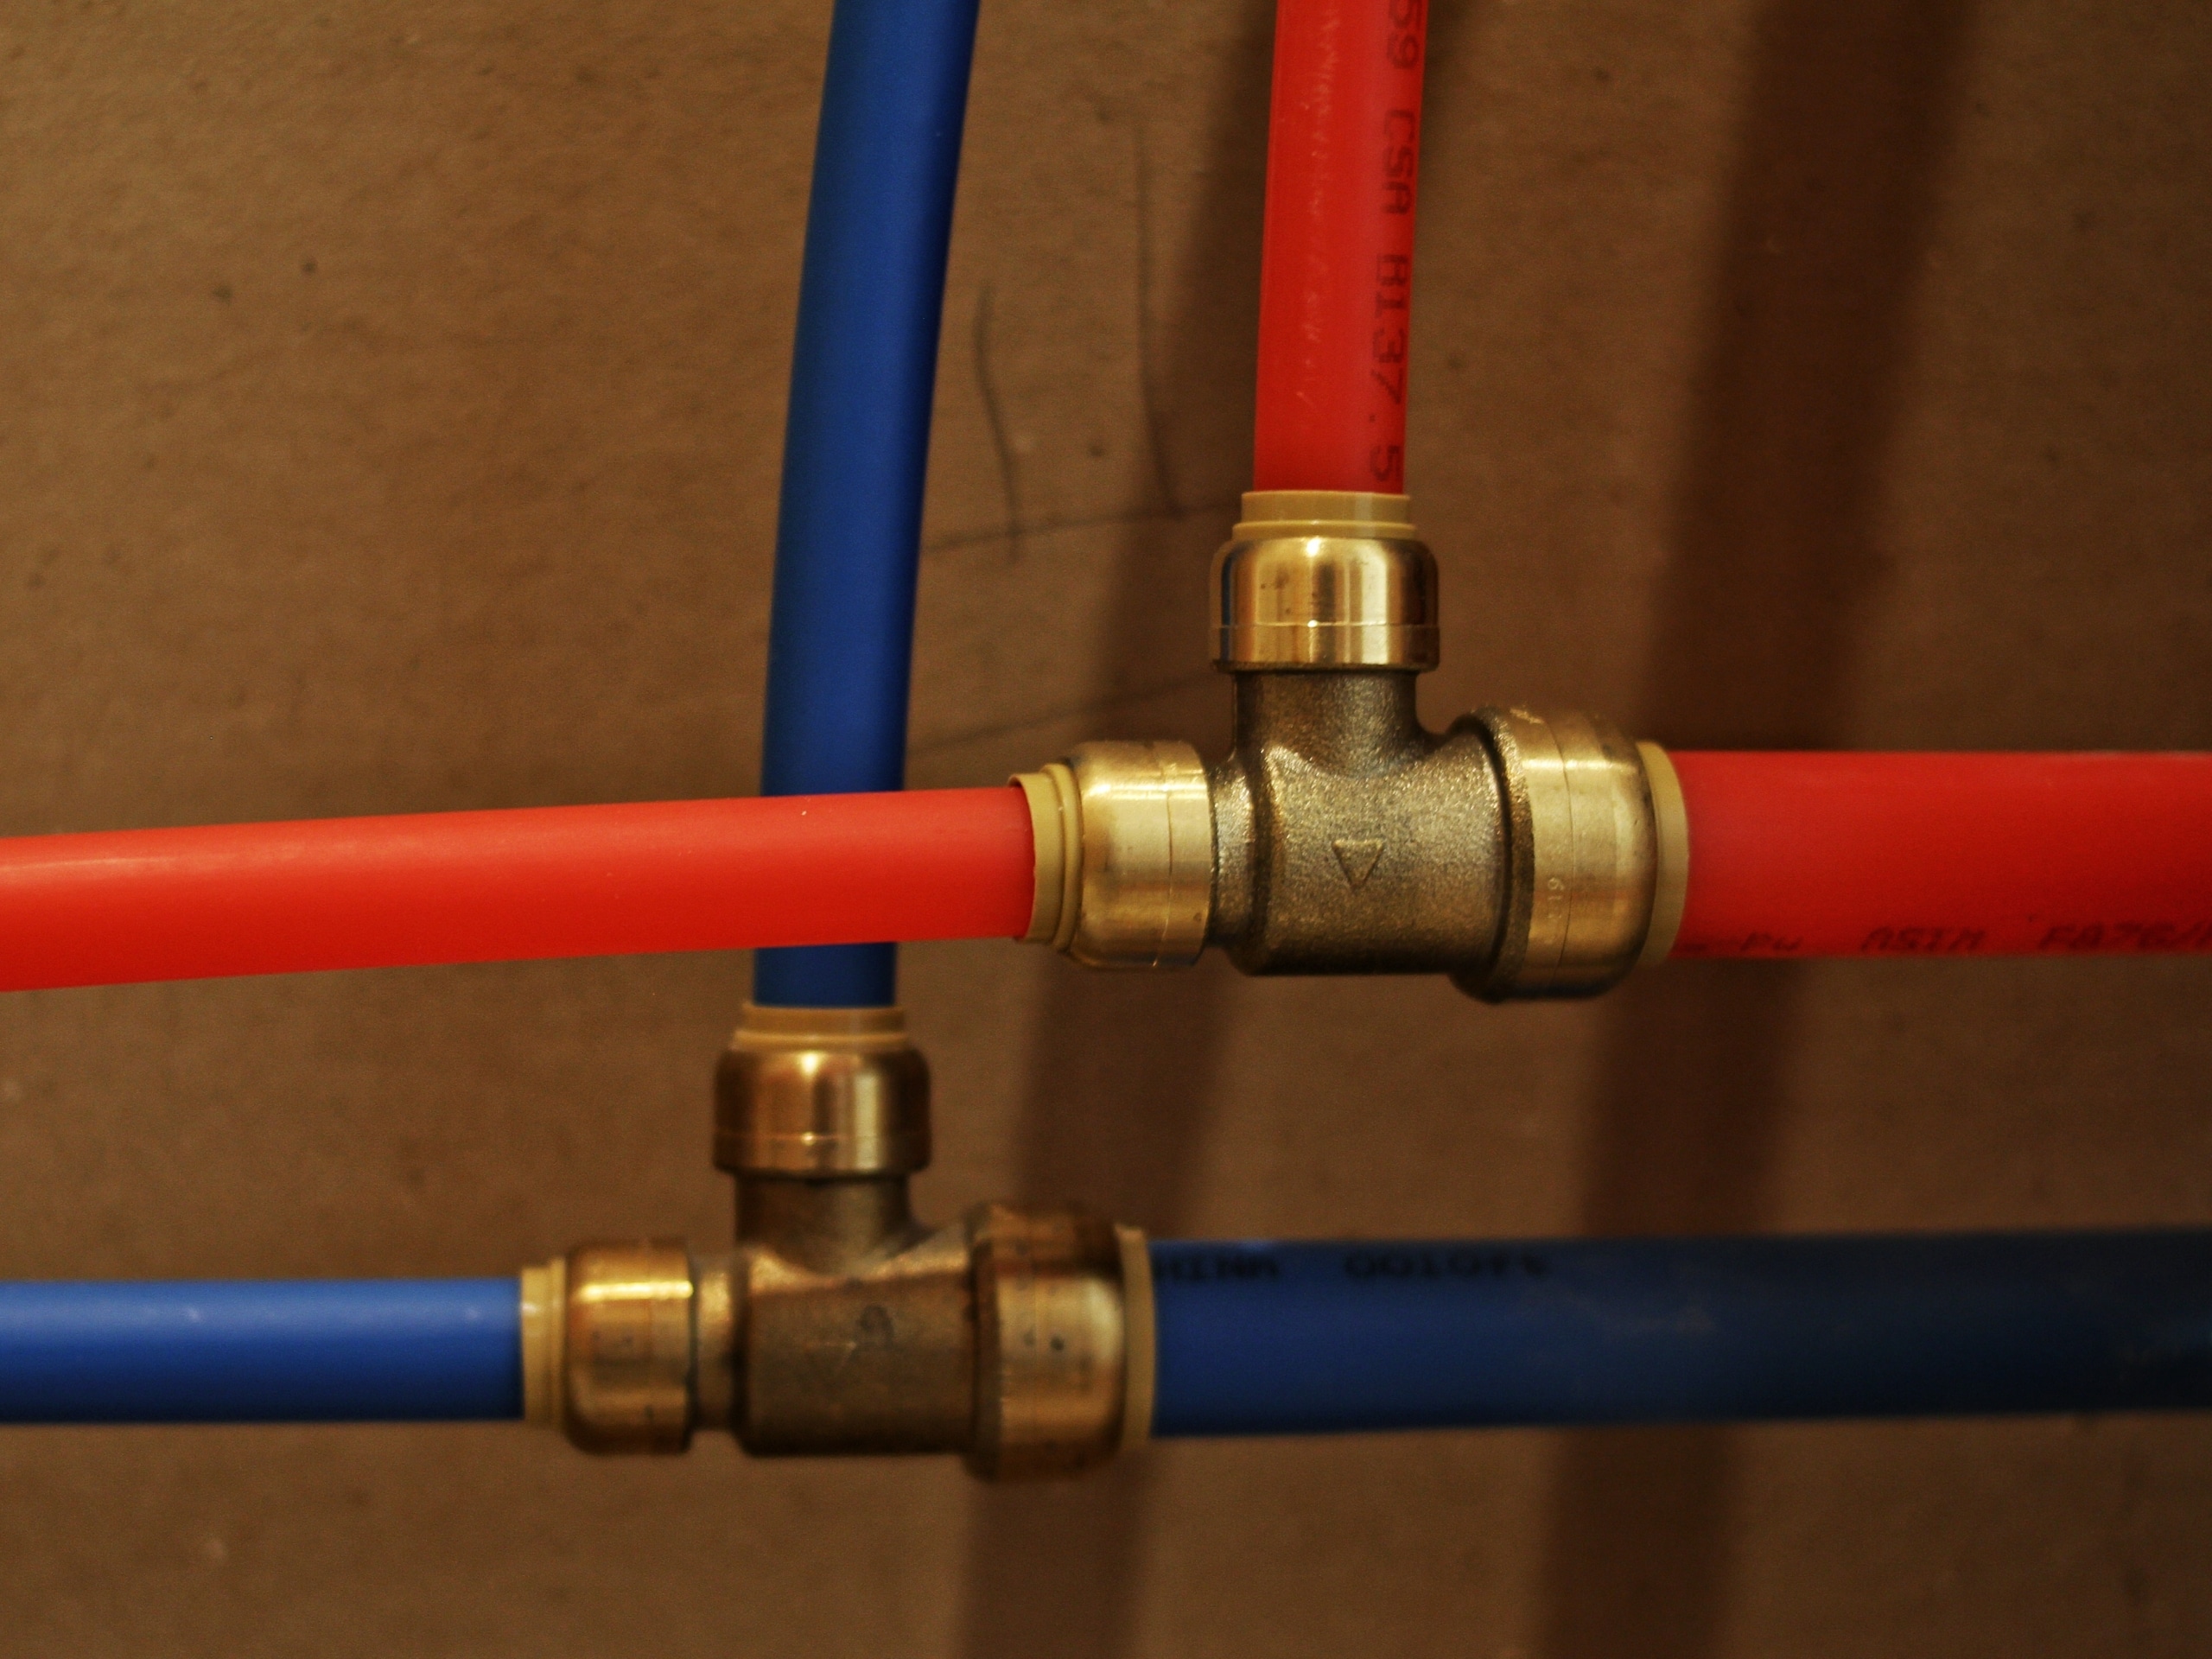 Red and blue type A pipes, in this case meaning hot water and cold water